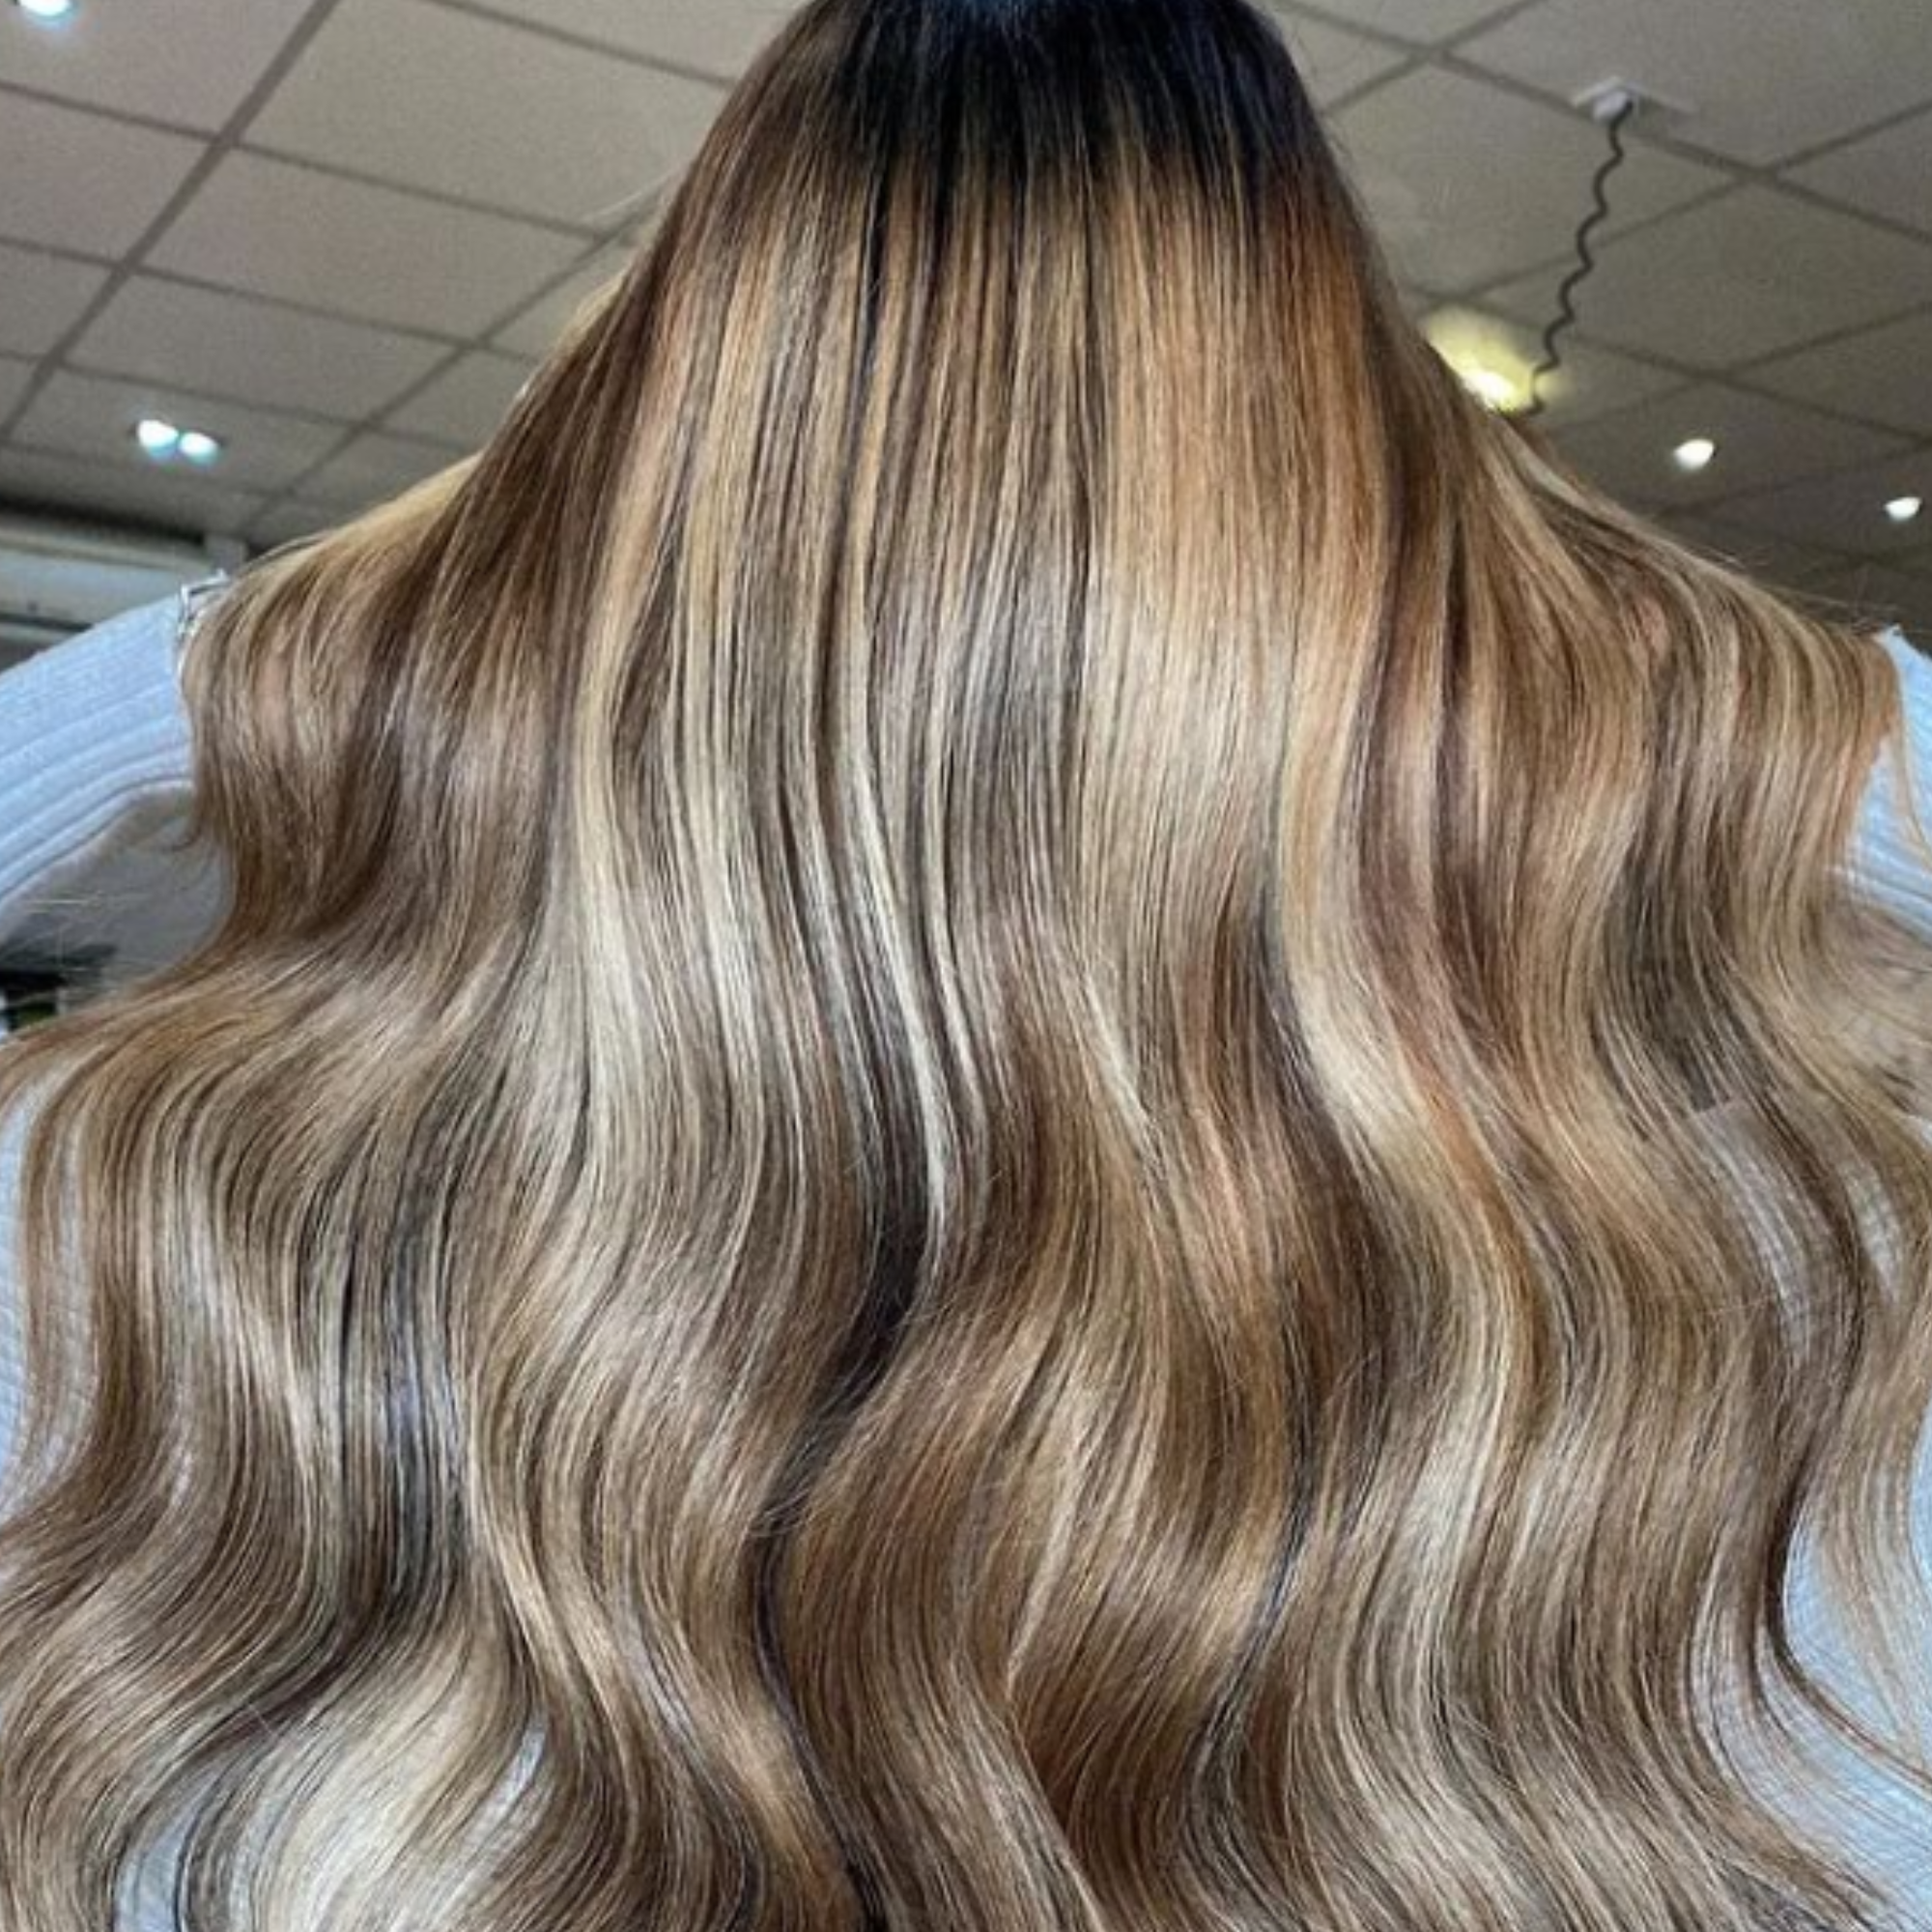 18" Invisible Tape Extensions Rooted Supermodel